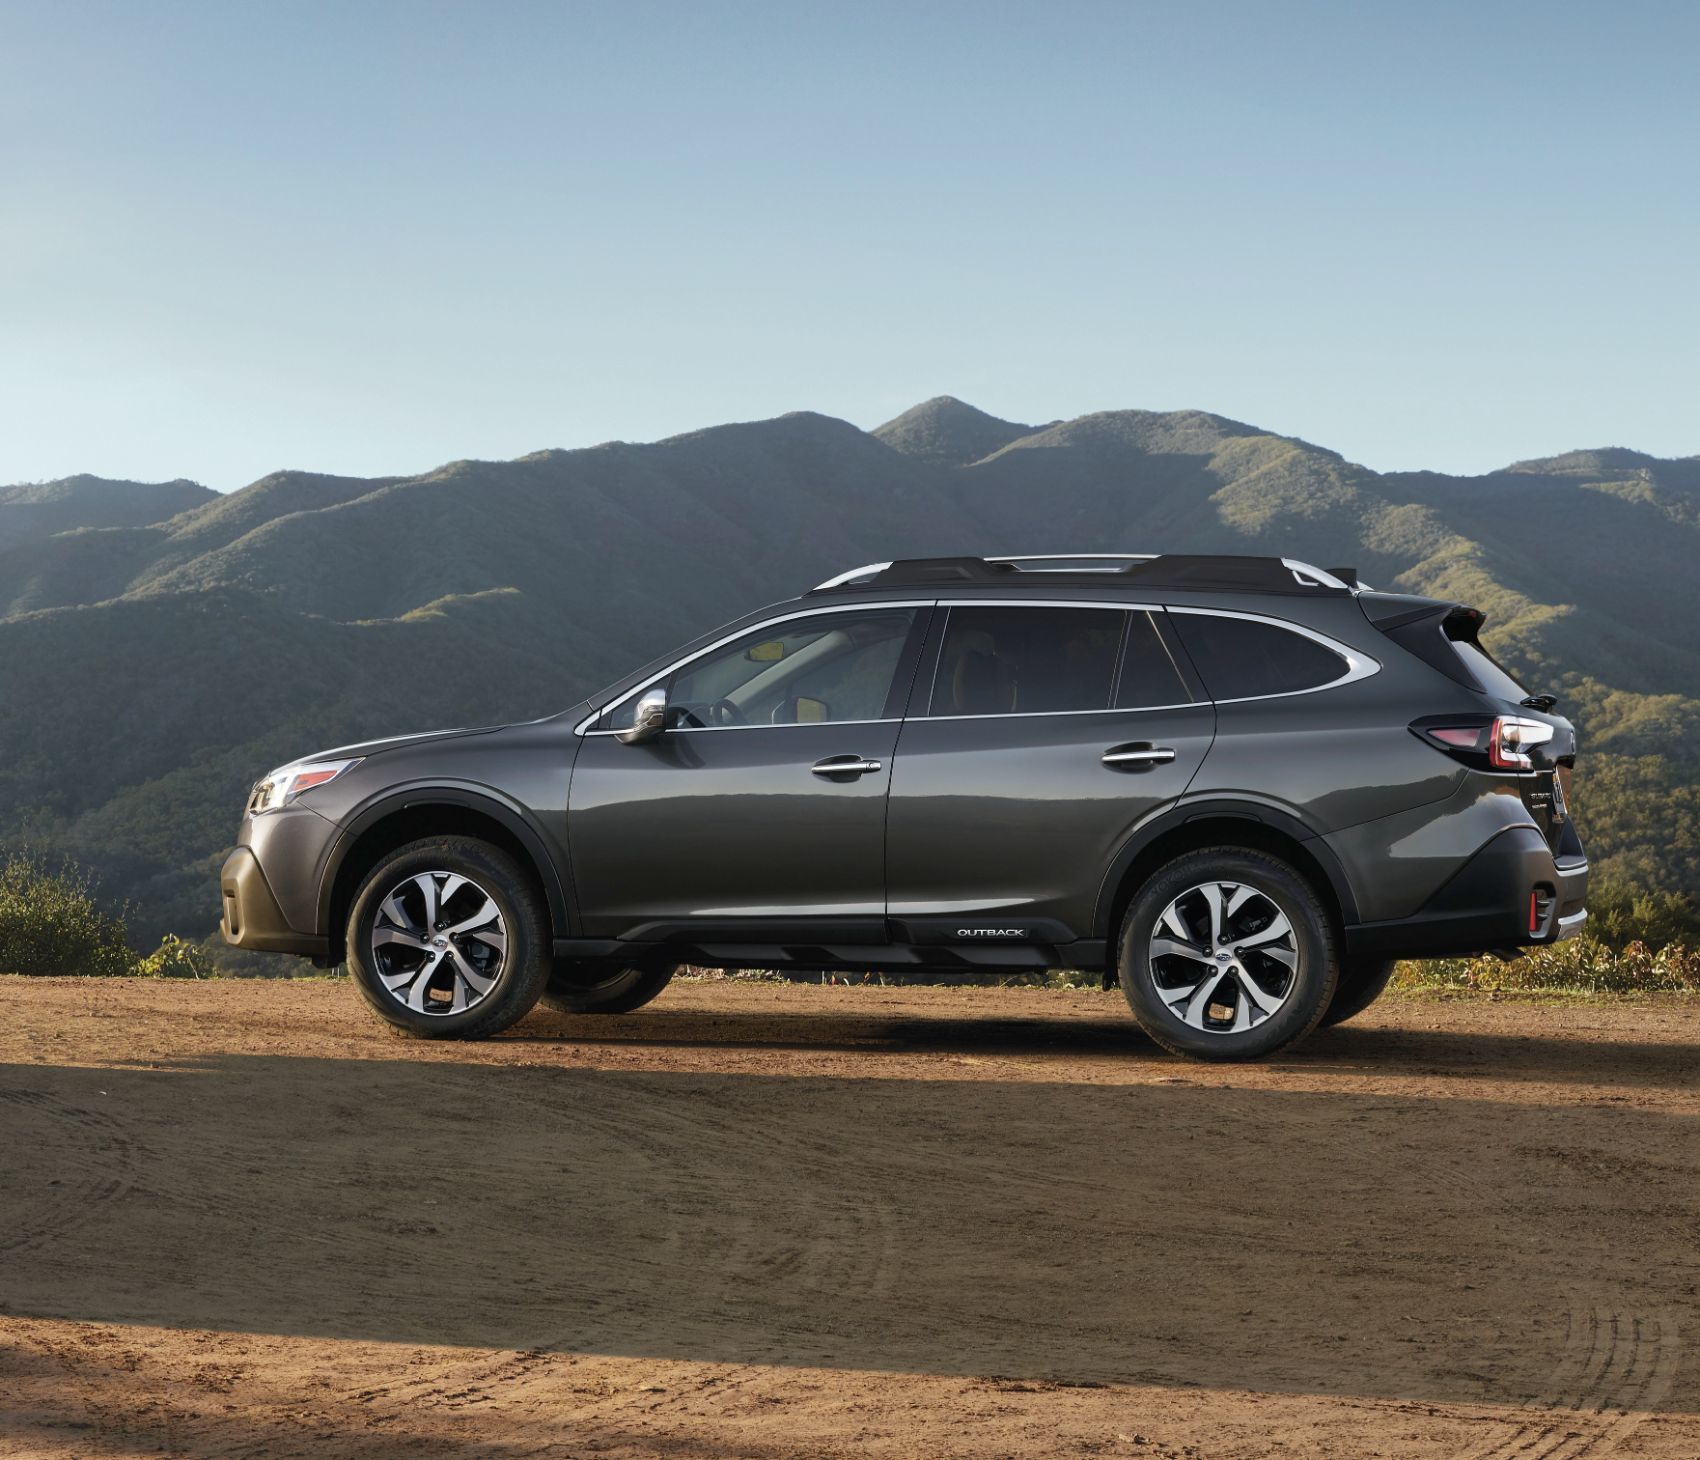 12 Subaru Outback: Trim Levels, Available Features & Pricing Info